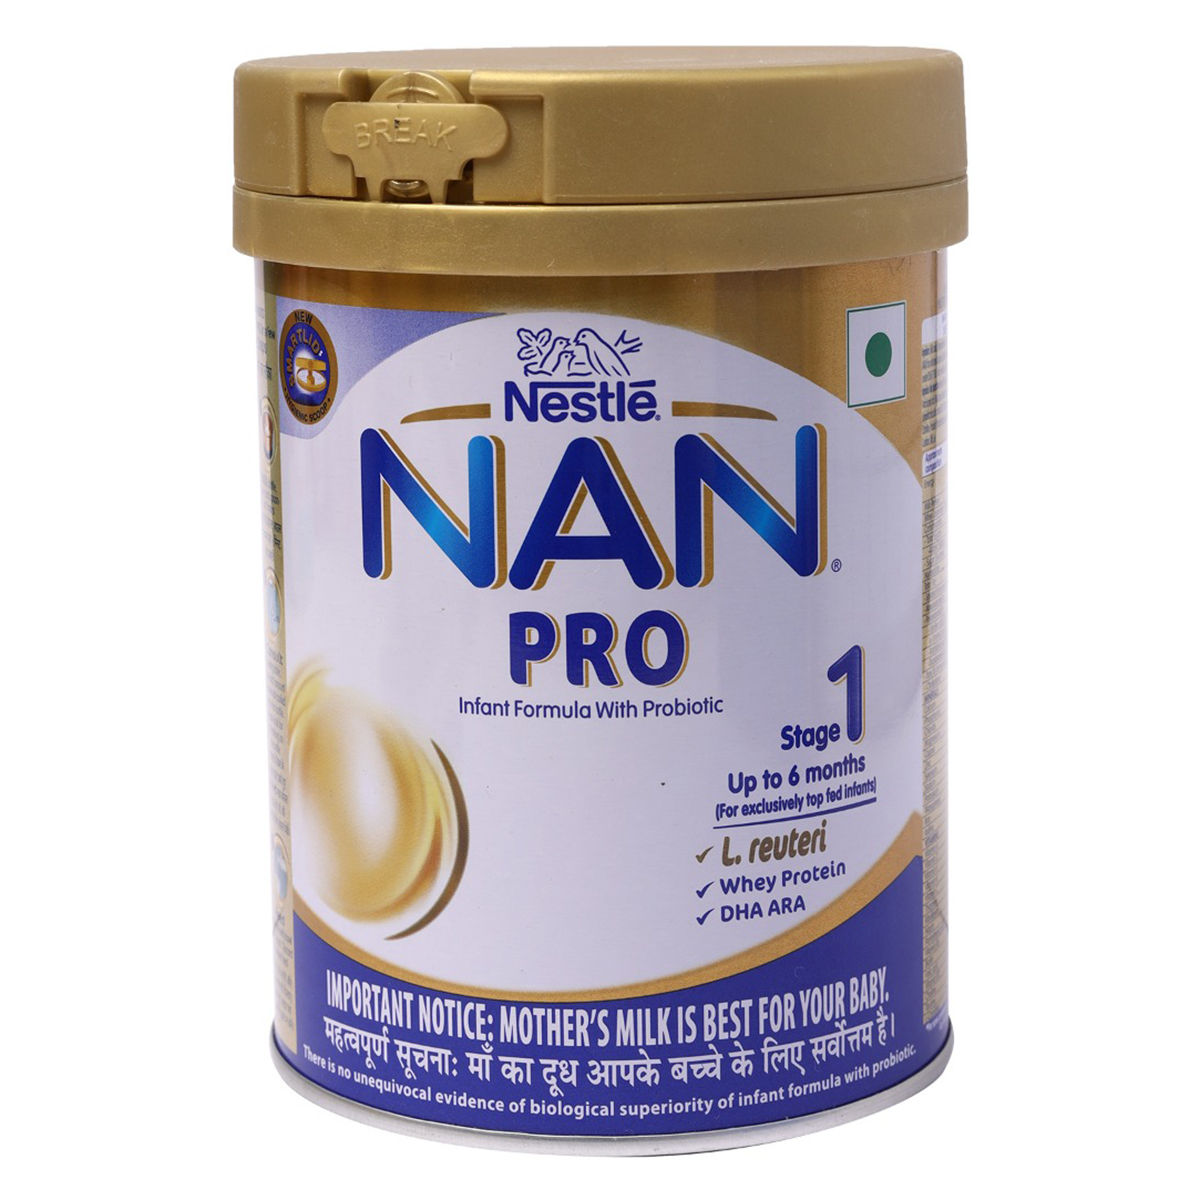 Nestlé NAN 2 OPTIPRO Formula (6-12 months) Tin - Online Grocery Shopping  and Delivery in Bangladesh